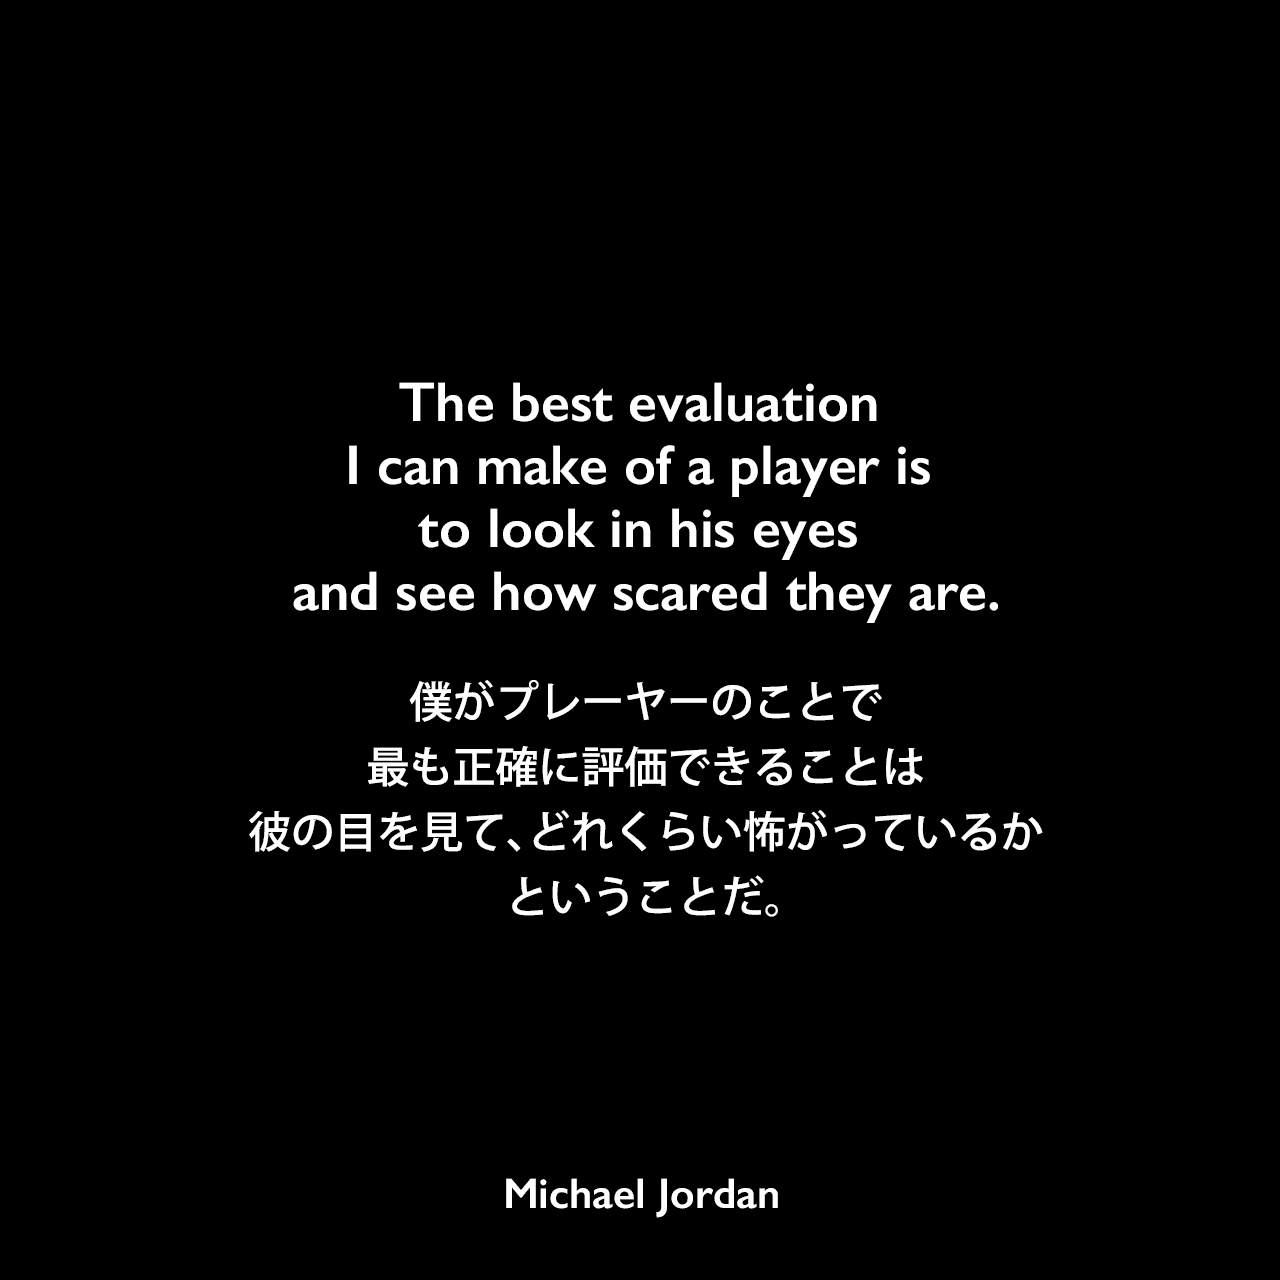 The best evaluation I can make of a player is to look in his eyes and see how scared they are.僕がプレーヤーのことで最も正確に評価できることは、彼の目を見て、どれくらい怖がっているかということだ。Michael Jordan